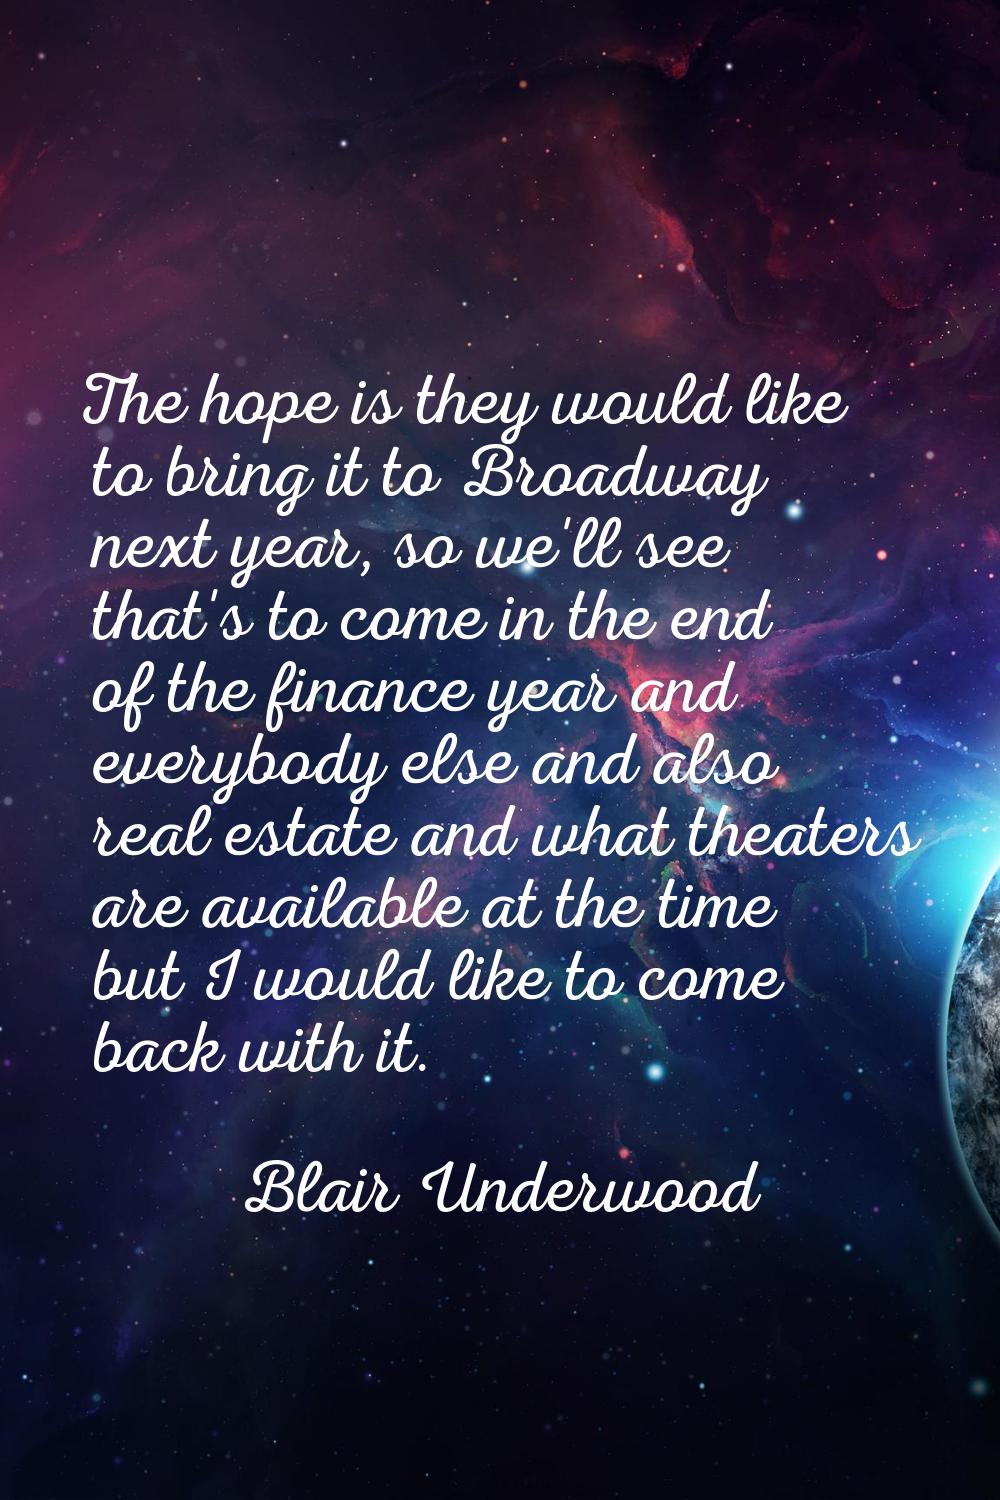 The hope is they would like to bring it to Broadway next year, so we'll see that's to come in the e